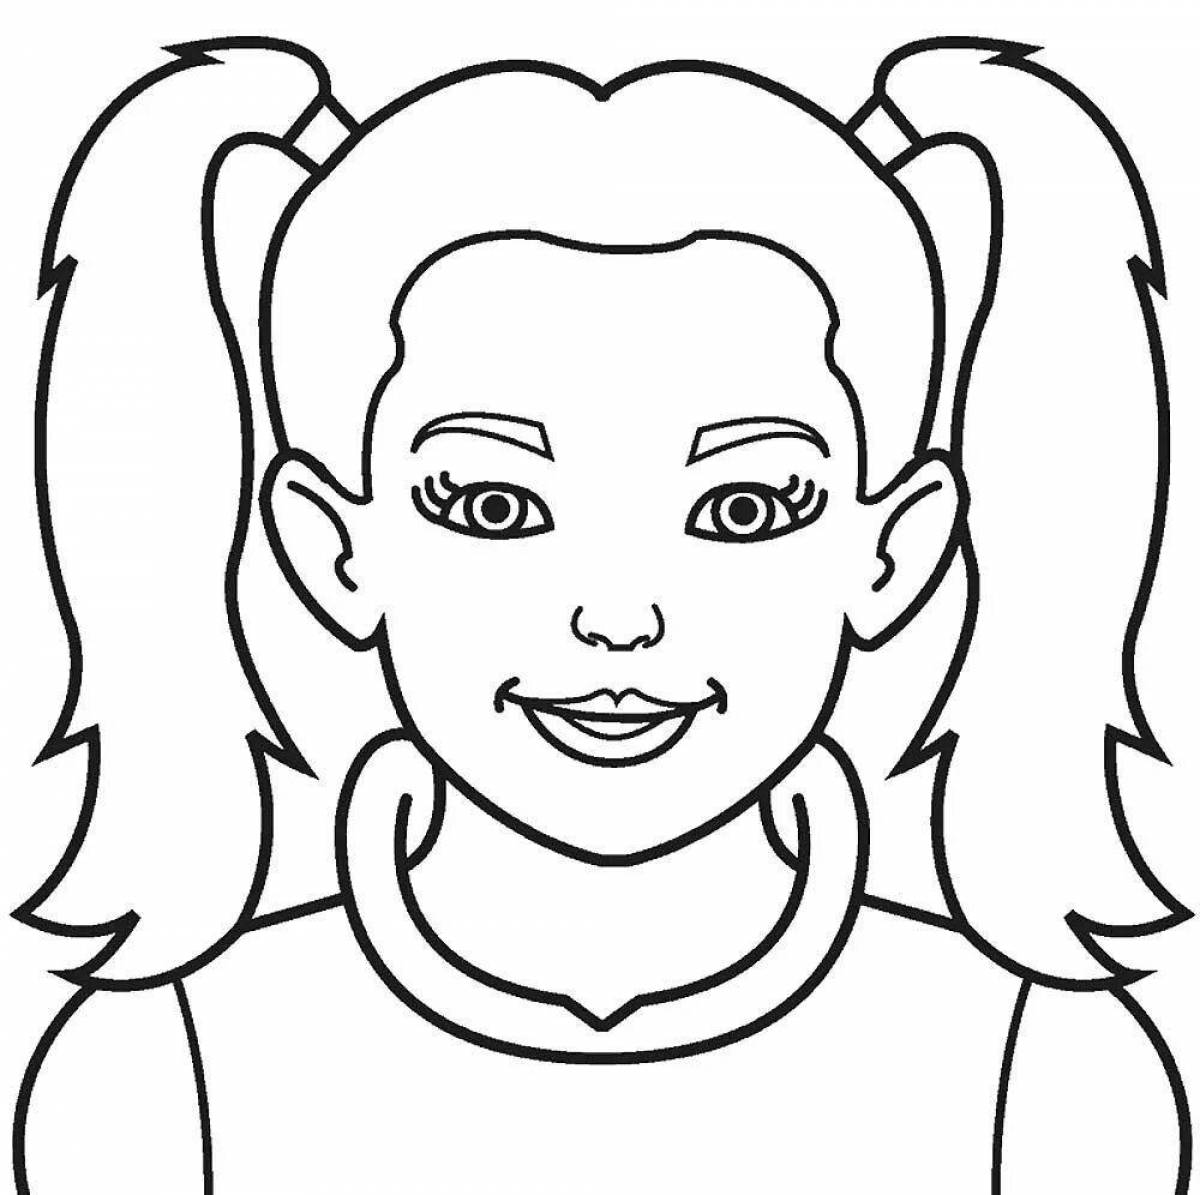 Colorful human face coloring page for kids